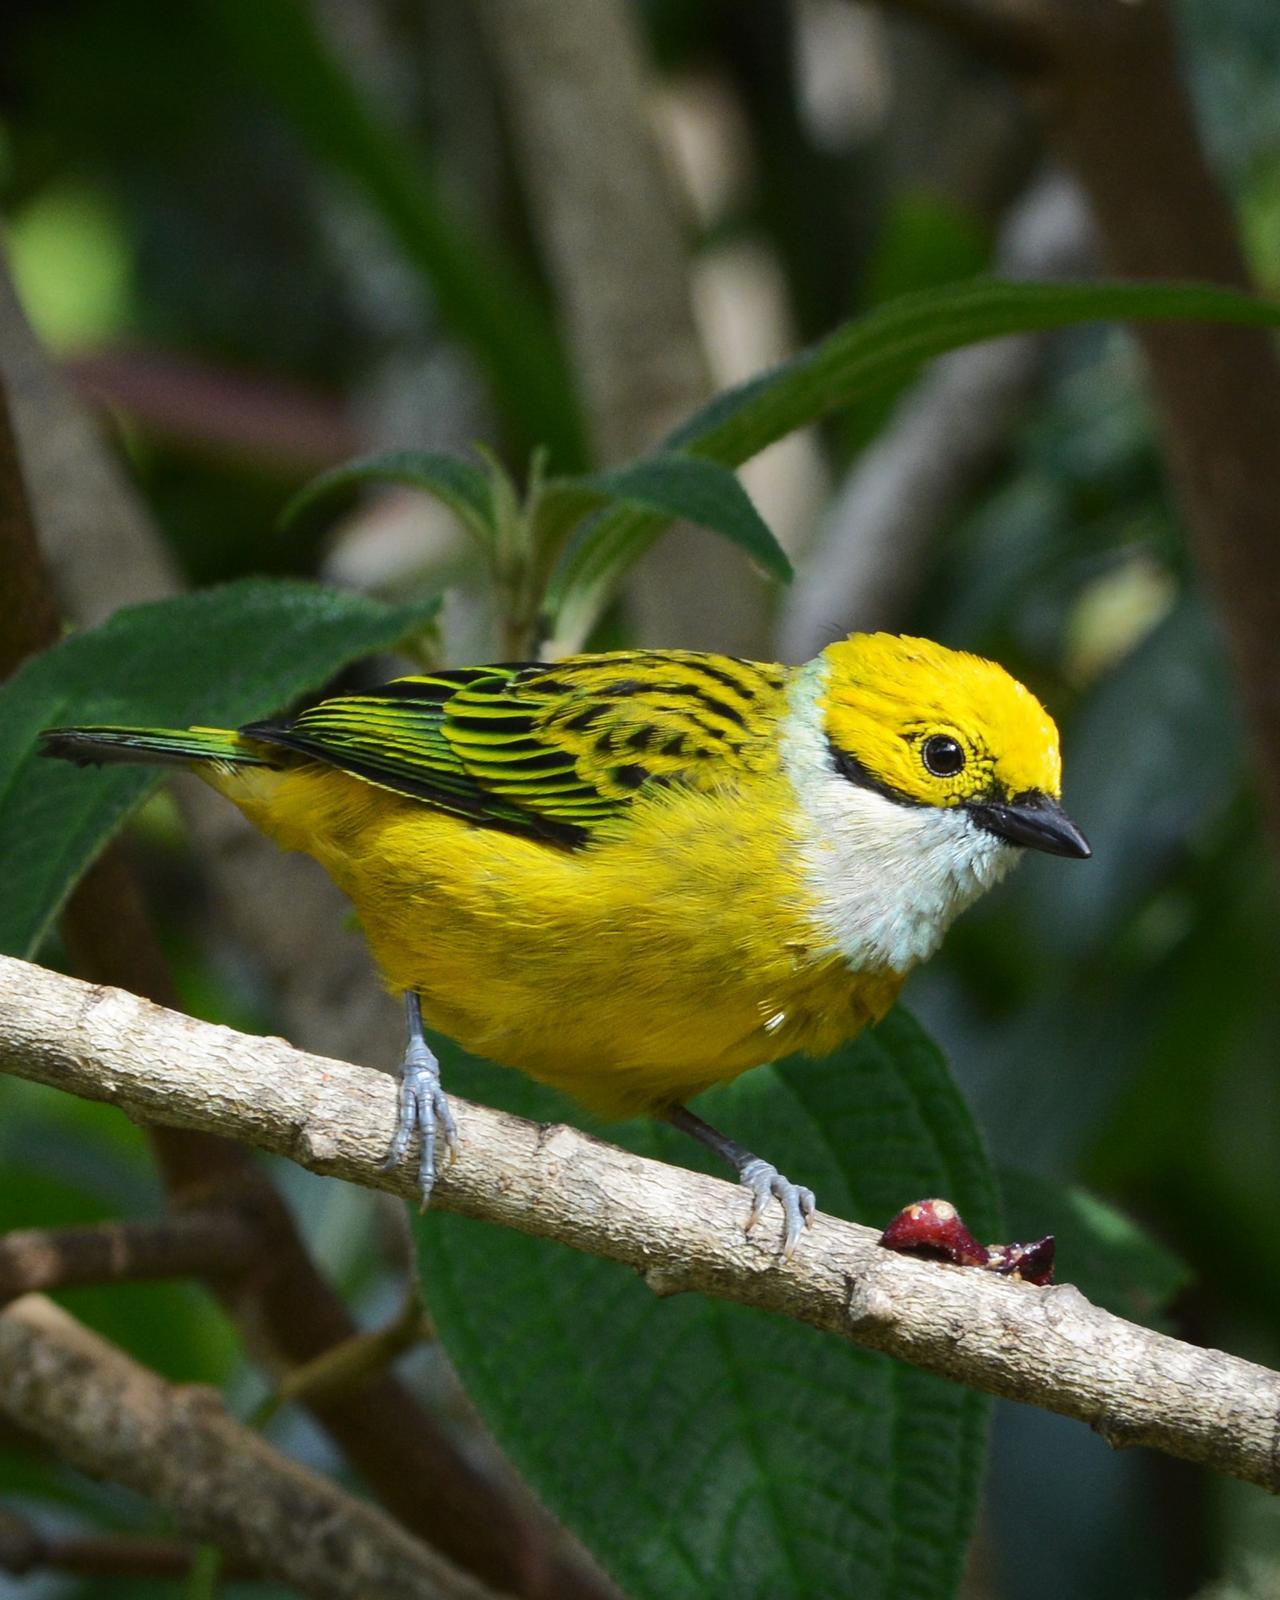 Silver-throated Tanager Photo by David Hollie